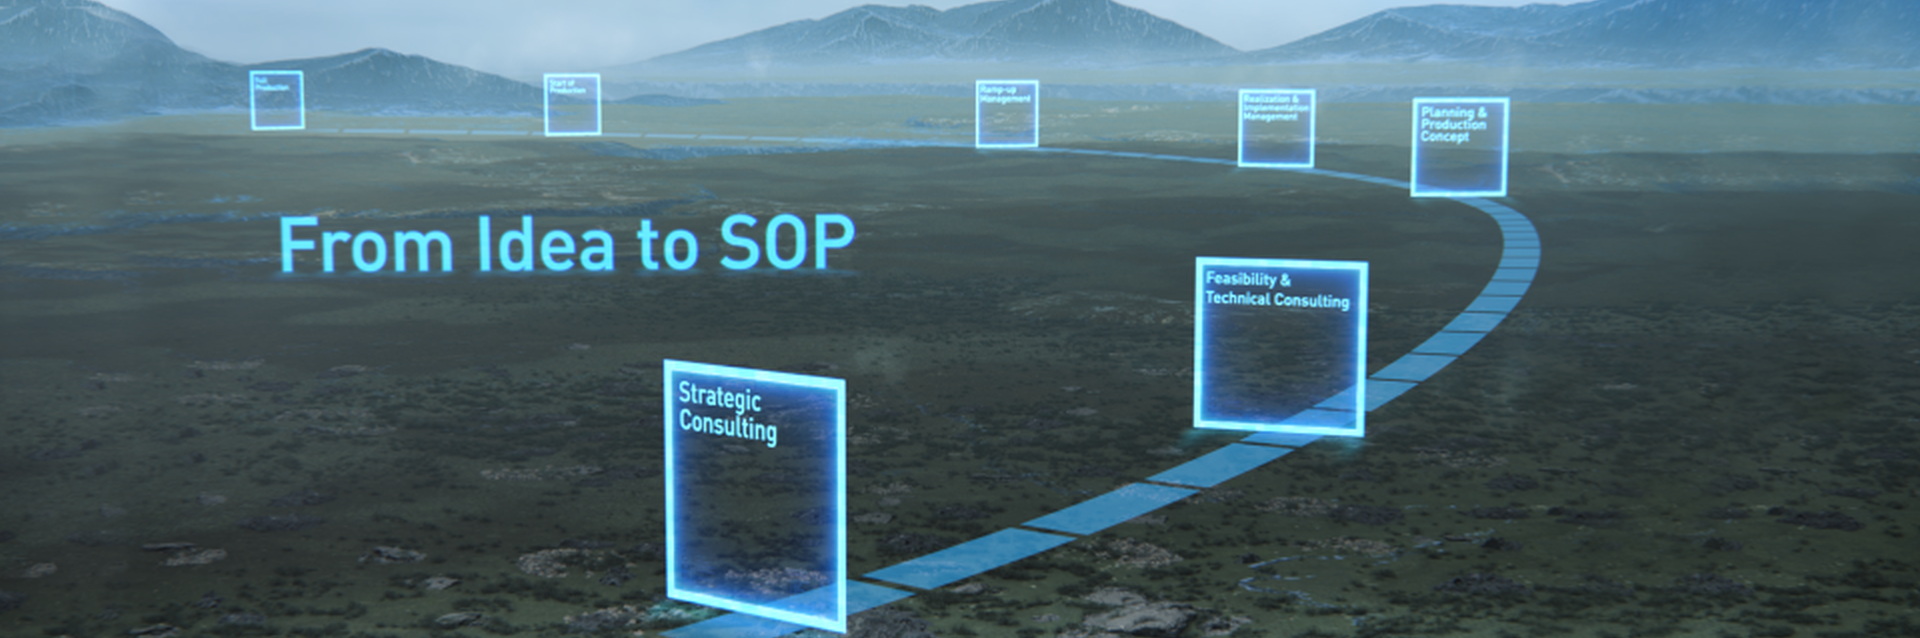 From Idea to SOP - 7 goals describing the services of Dürr Consulting are projected onto the landscape on a line